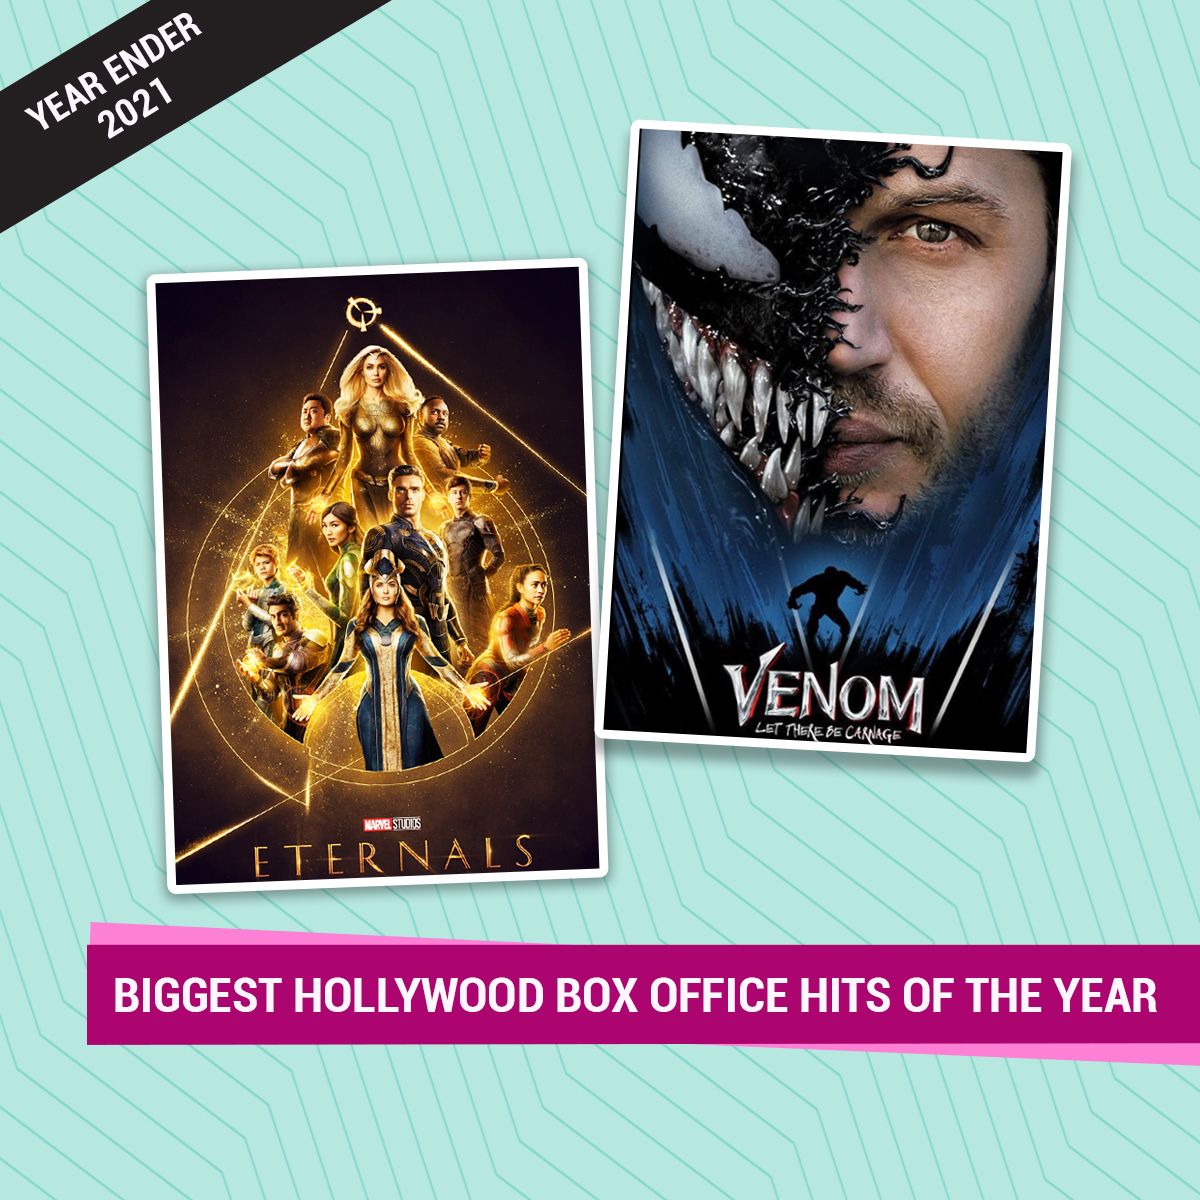  Box Office Hits of the Year